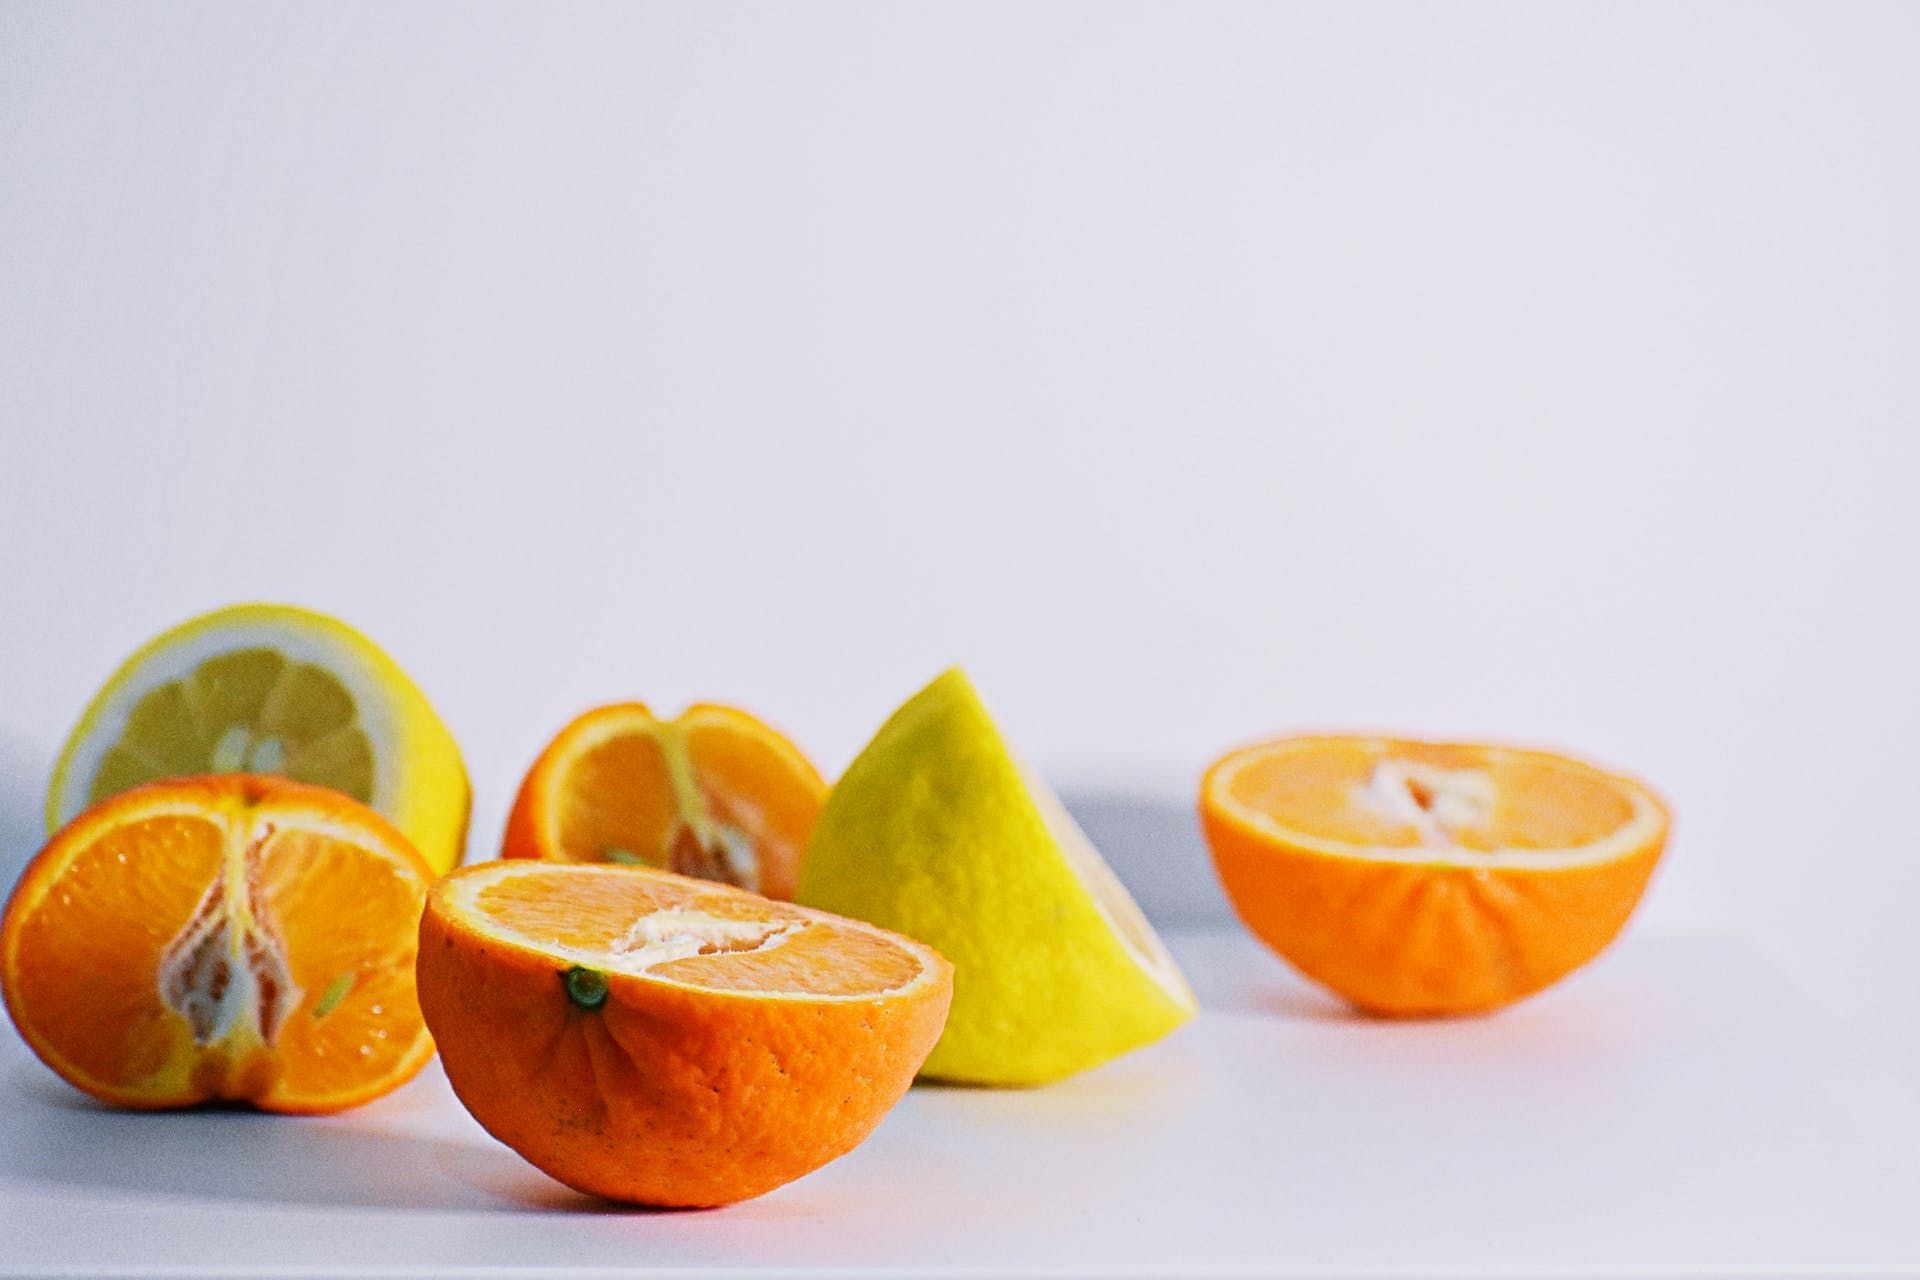 The juice of citrus fruits is also good for immunity. (Image via Pexels/Dids)